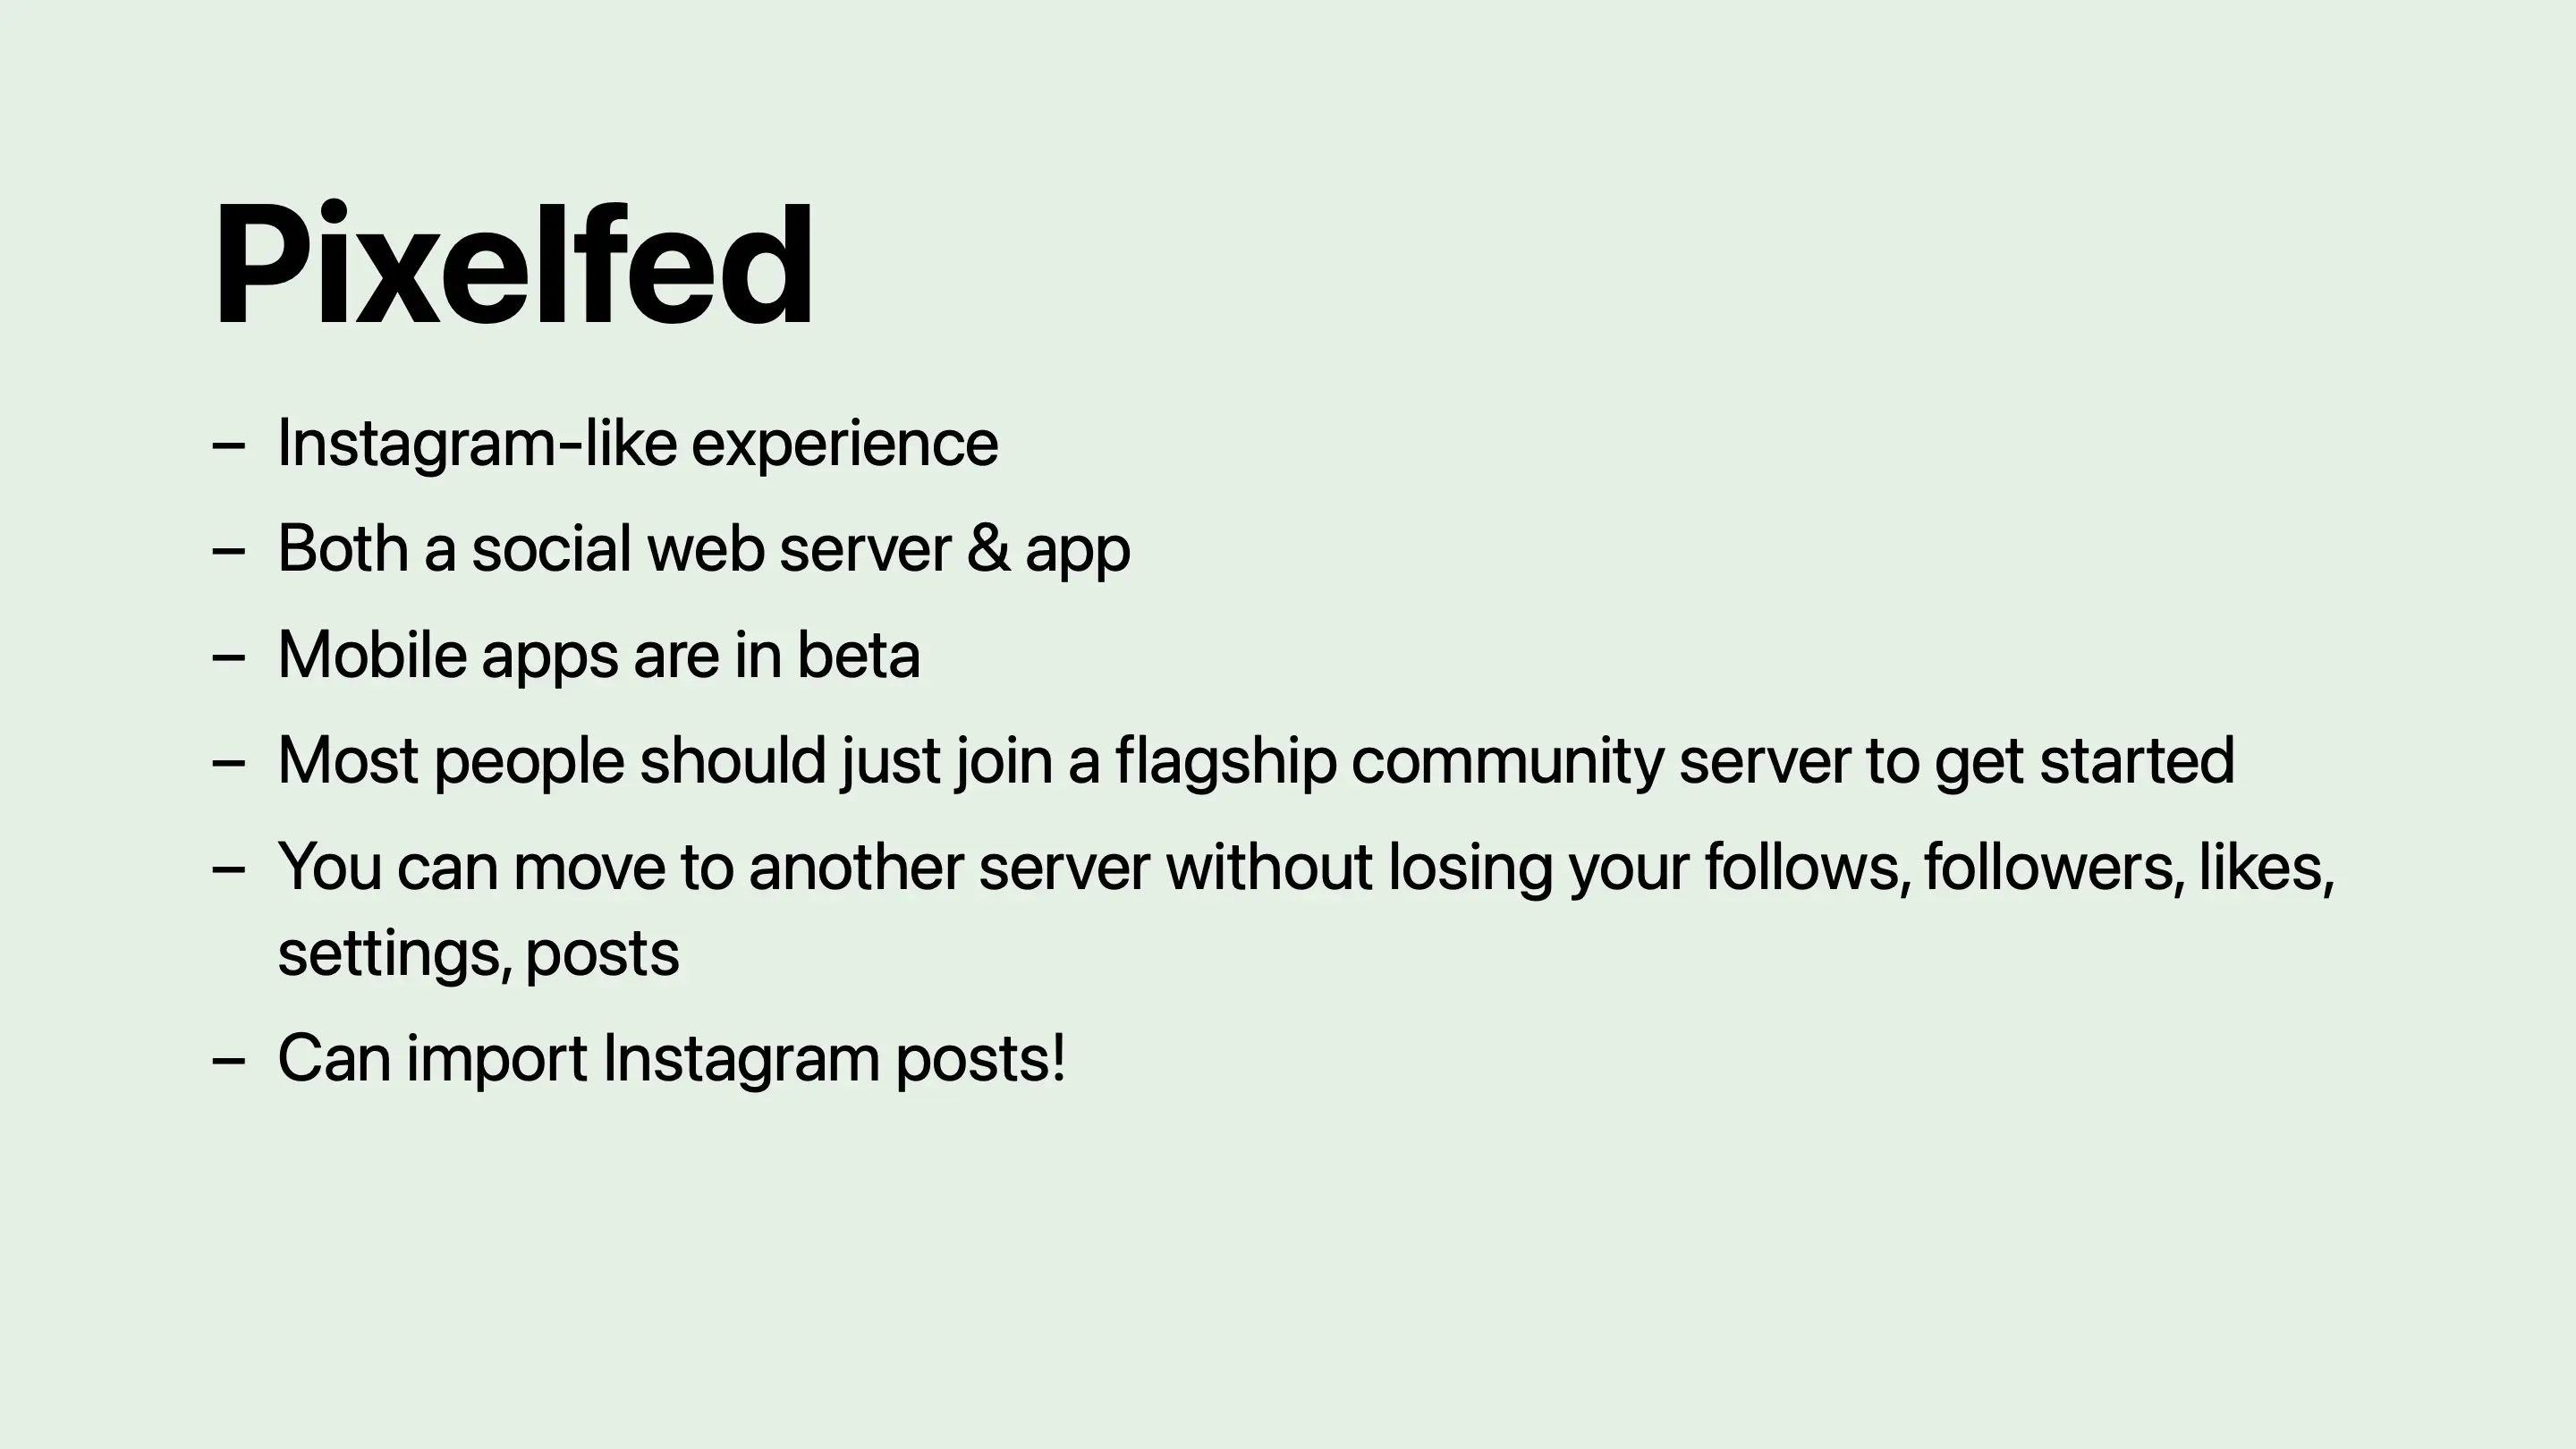 Pixelfed: Instagram-like experience. Both a social web server and app. Mobile apps are in beta. Most people should just join a flagship community server to get started. You can move to another server without losing your follows, followers, likes, settings, posts. Can import Instagram posts!